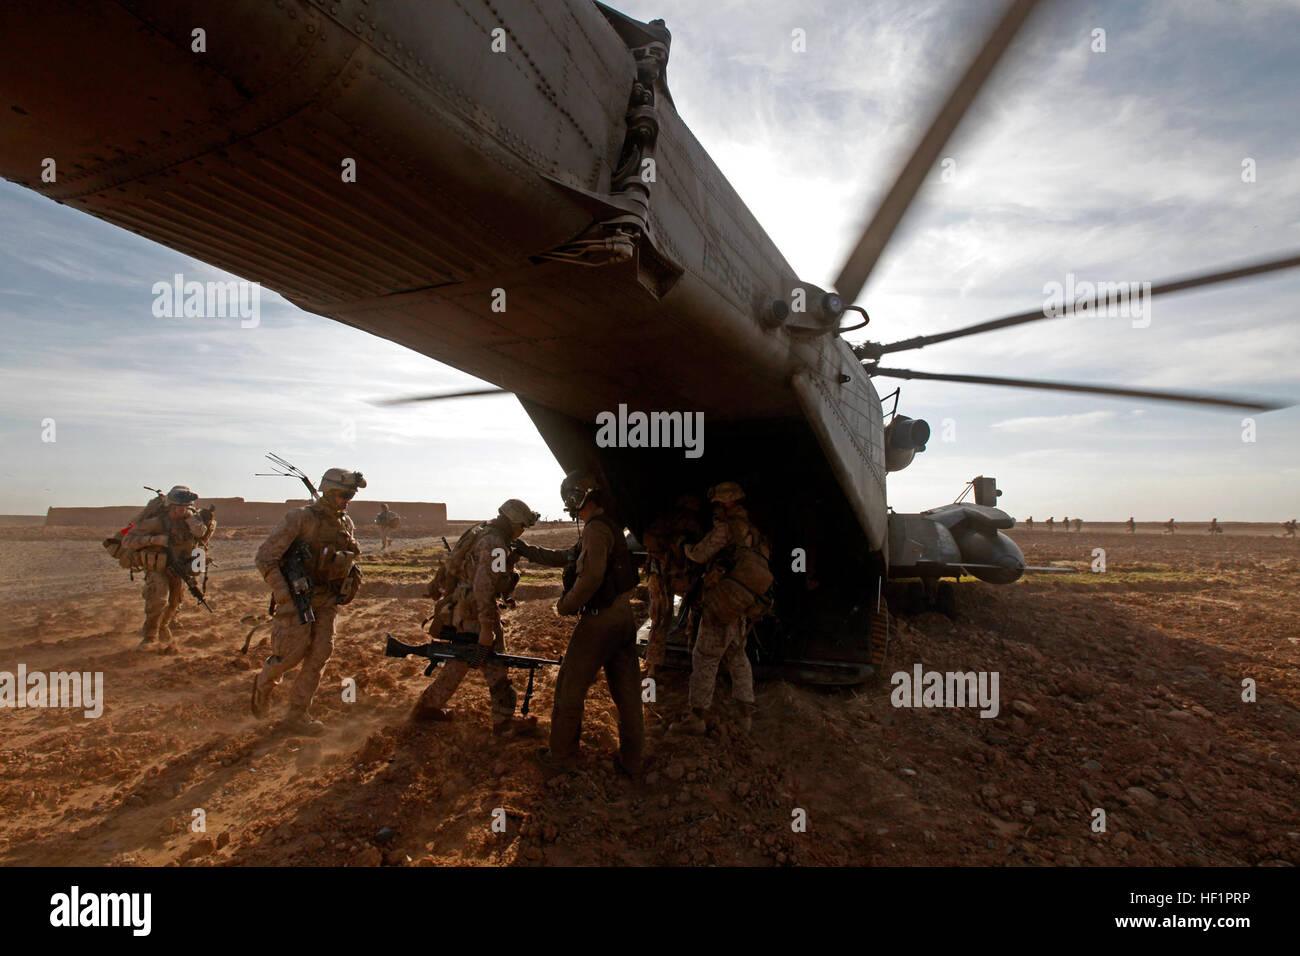 U.S. Marines with Charlie Company, 1st Battalion, 9th Marine Regiment (1/9), board a CH-53E Super Stallion helicopter assigned to Marine Heavy Helicopter Squadron 462 (HMH-462), in Helmand province, Afghanistan, Nov. 2, 2013. HMH-462 transported 1/9 after completing an interdiction operation. (U.S. Marine Corps photo by Sgt. Gabriela Garcia/Released) HMH-462 Pick Up C CO 1-9 131102-M-SA716-051 Stock Photo